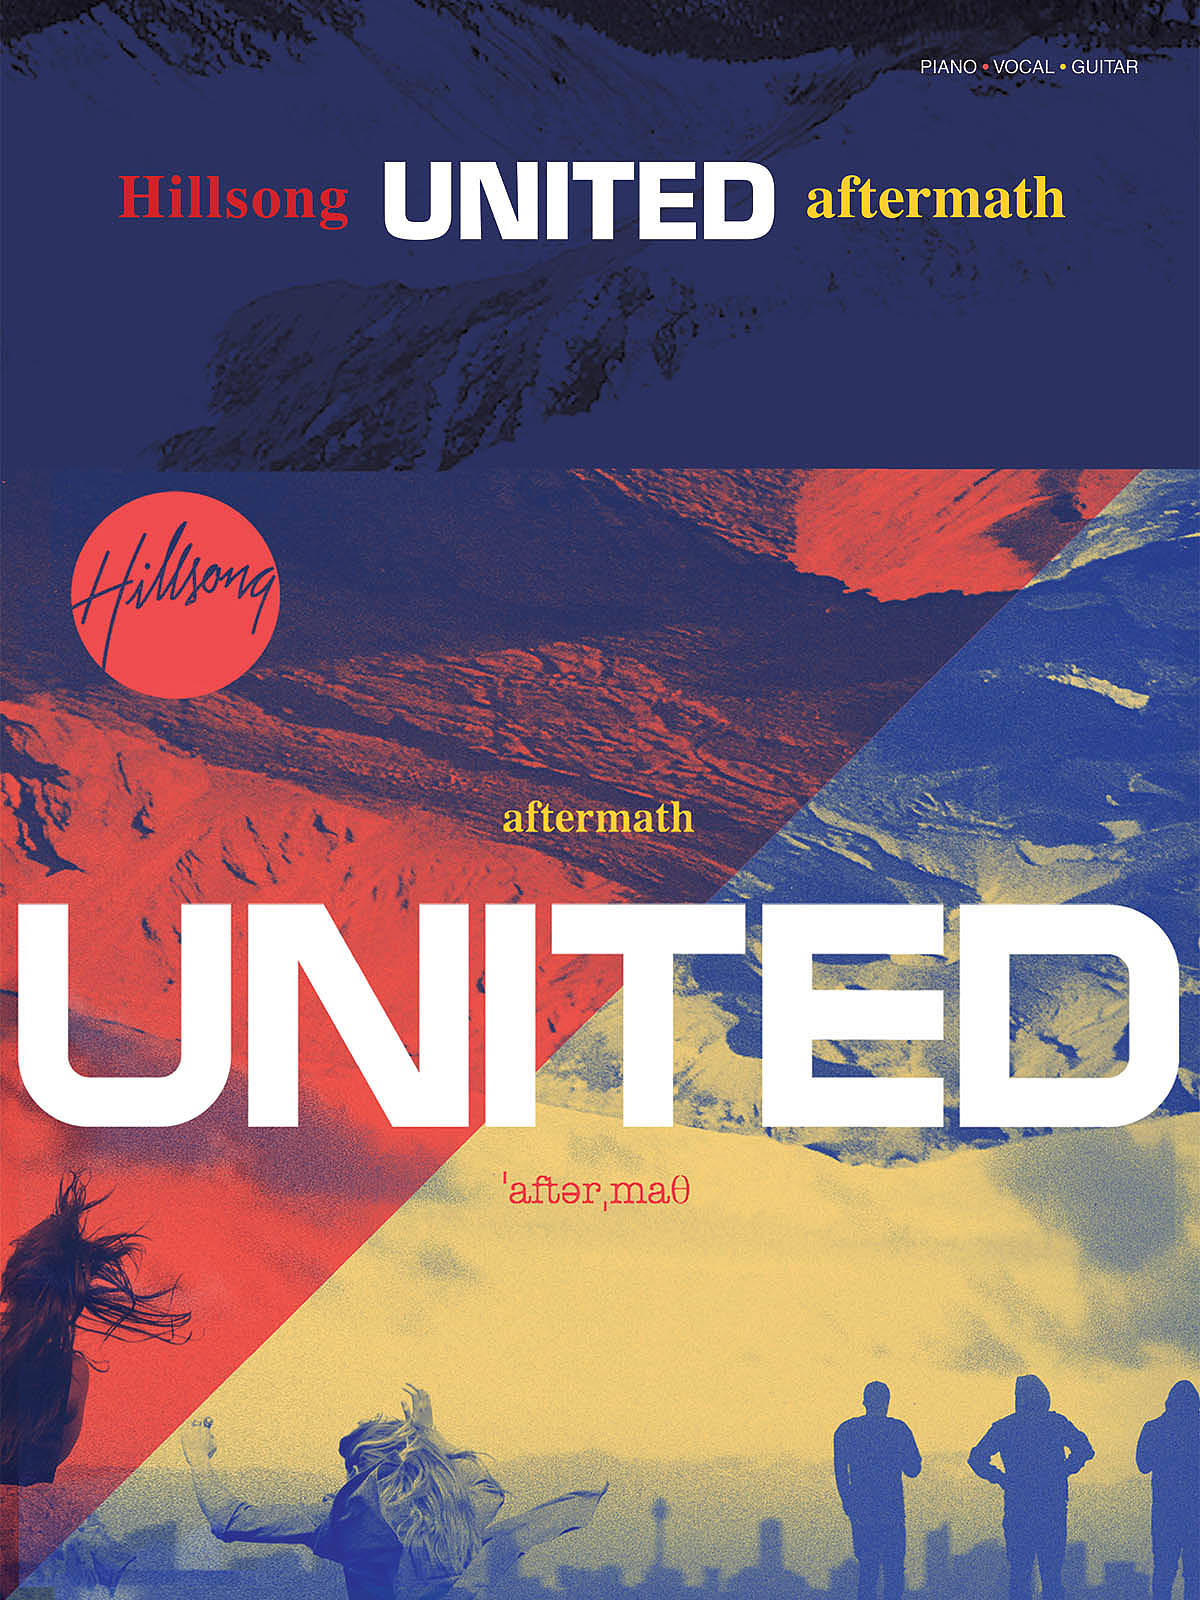 Hillsong United Aftermath Zip